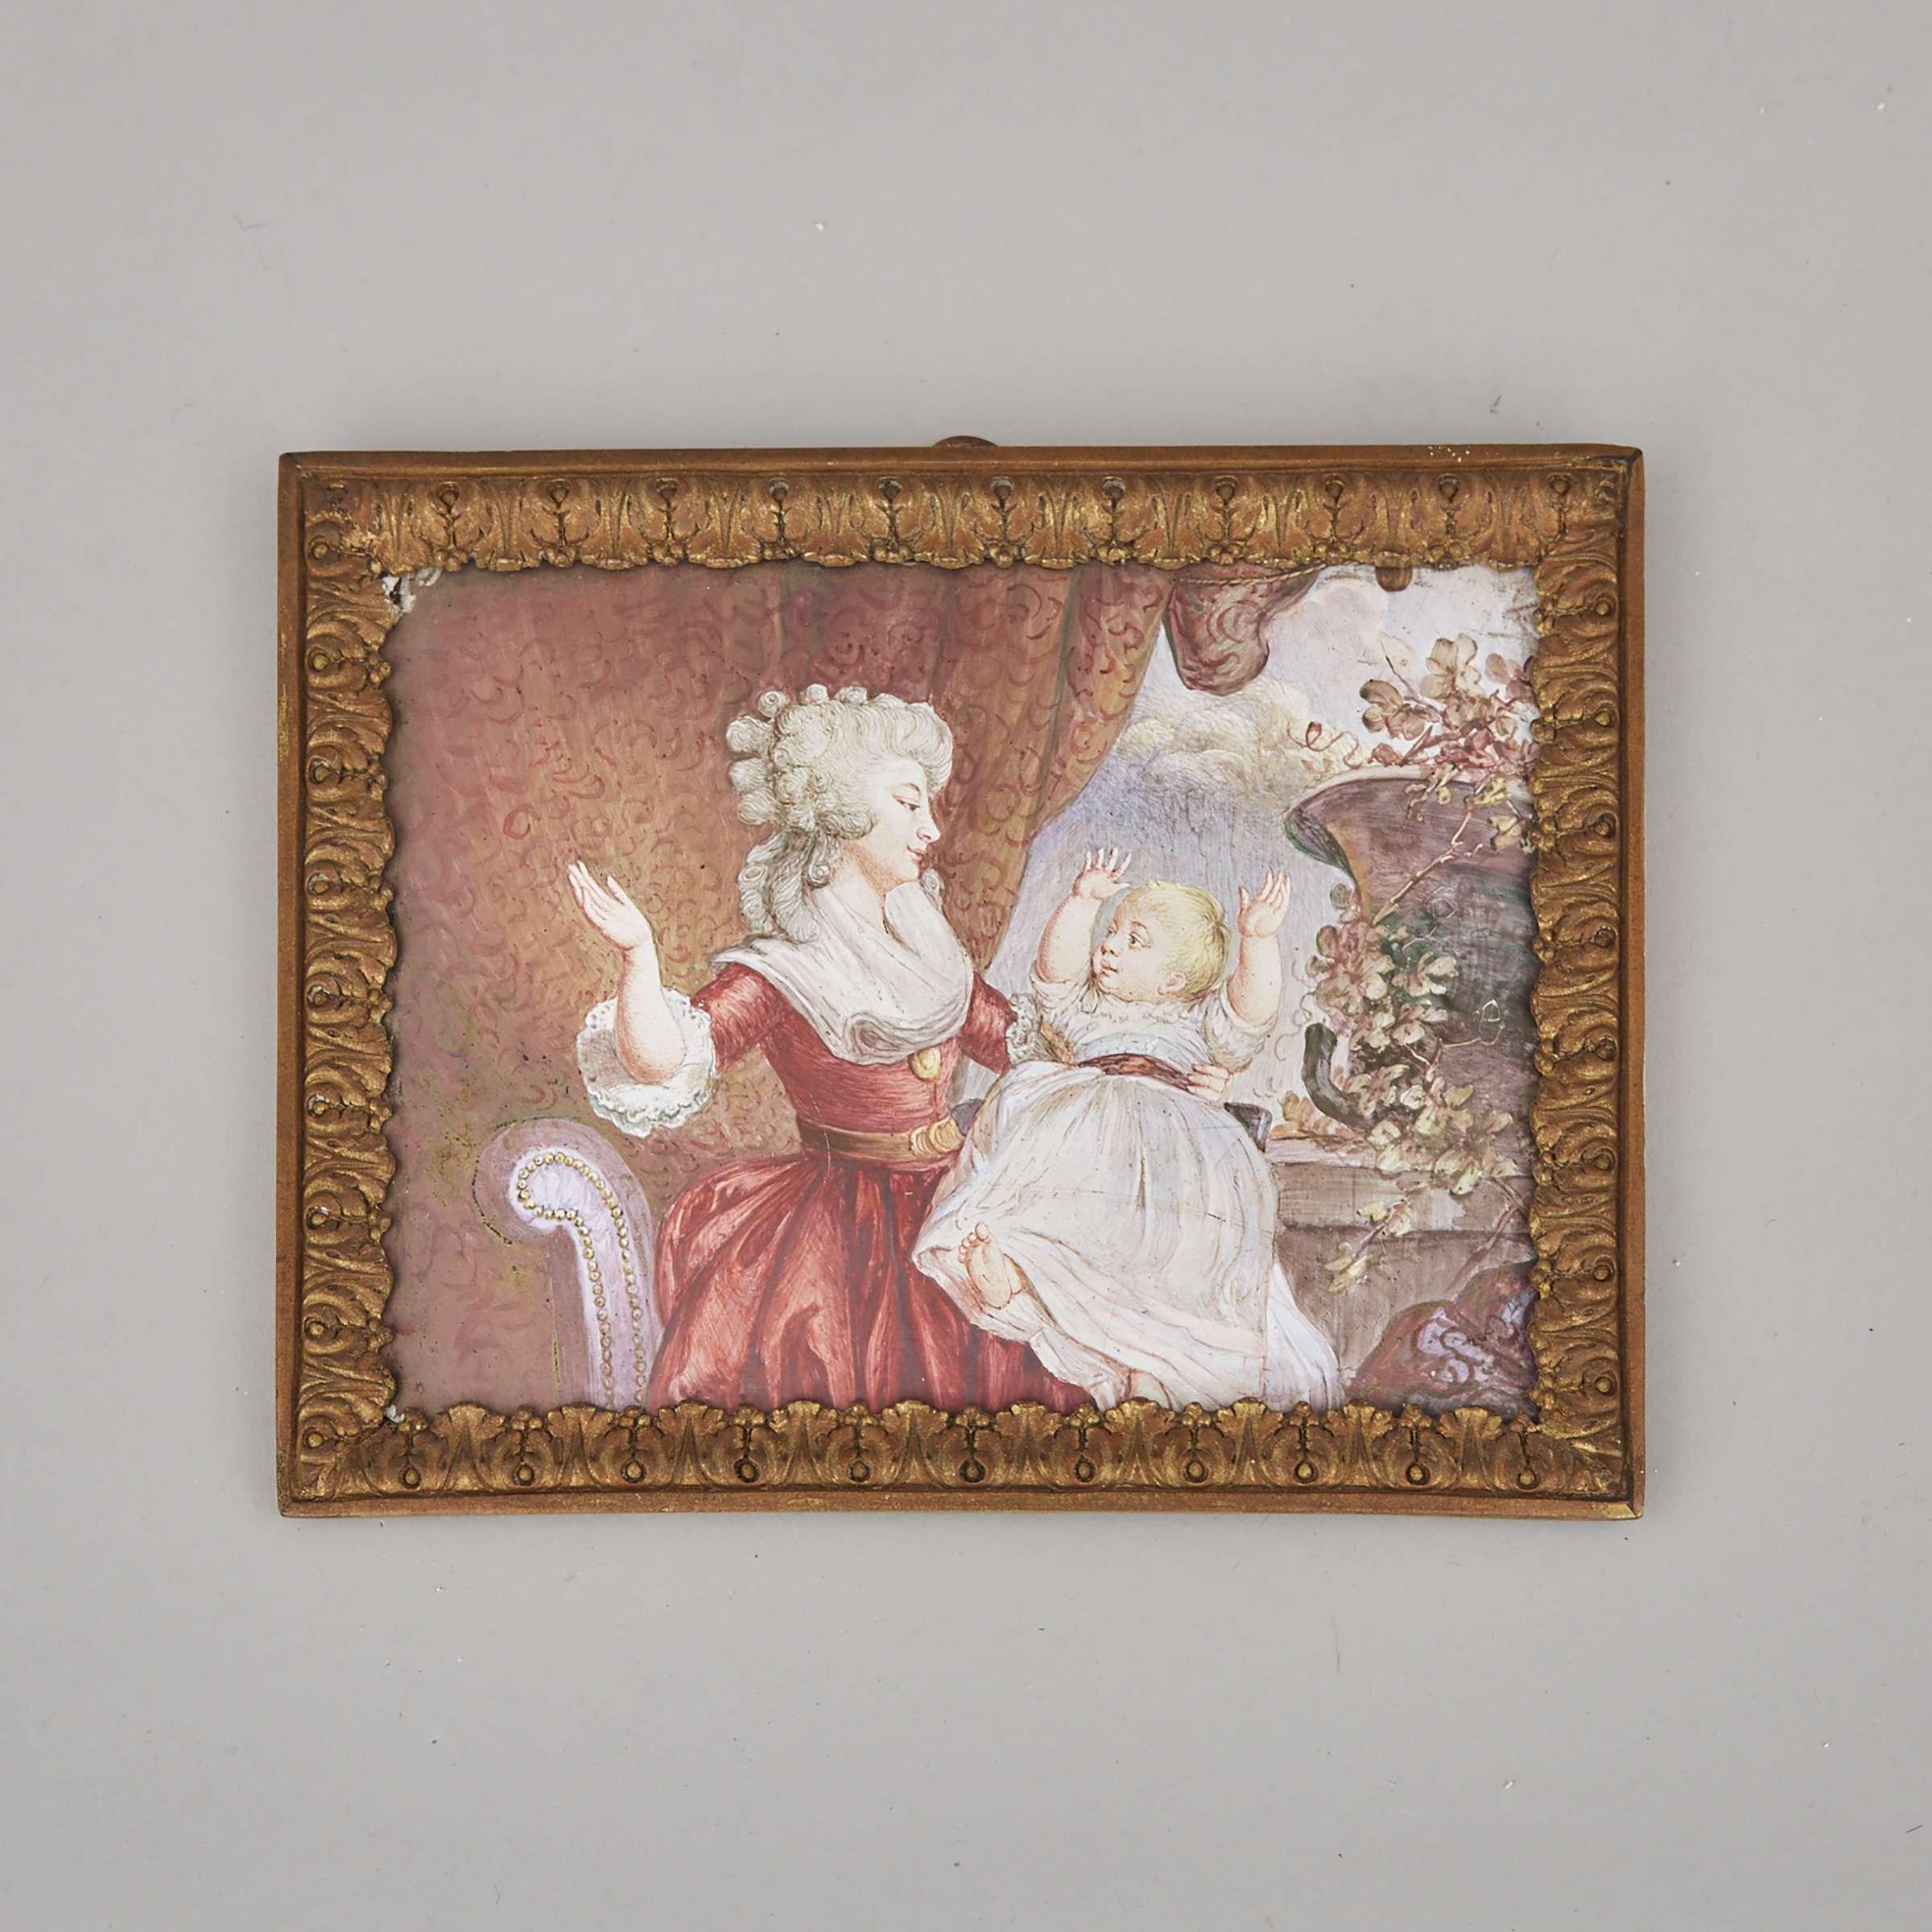 Staffordshire Enamel Plaque of The Duchess of Devonshire and Her Daugher, after the work by Joshua Reynolds, 19th century 